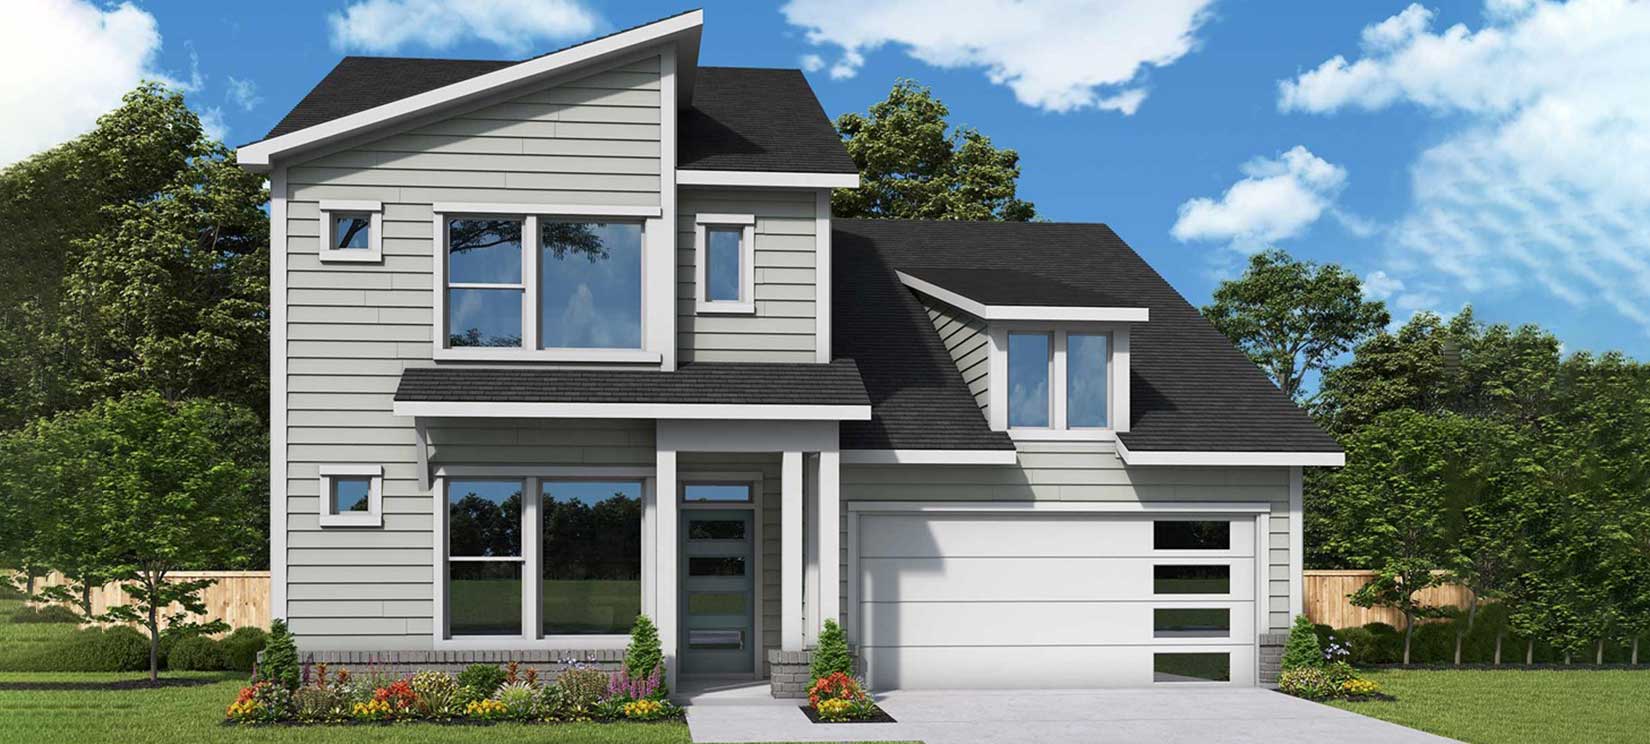 The Gladstone - Virtual Tour from David Weekley Homes